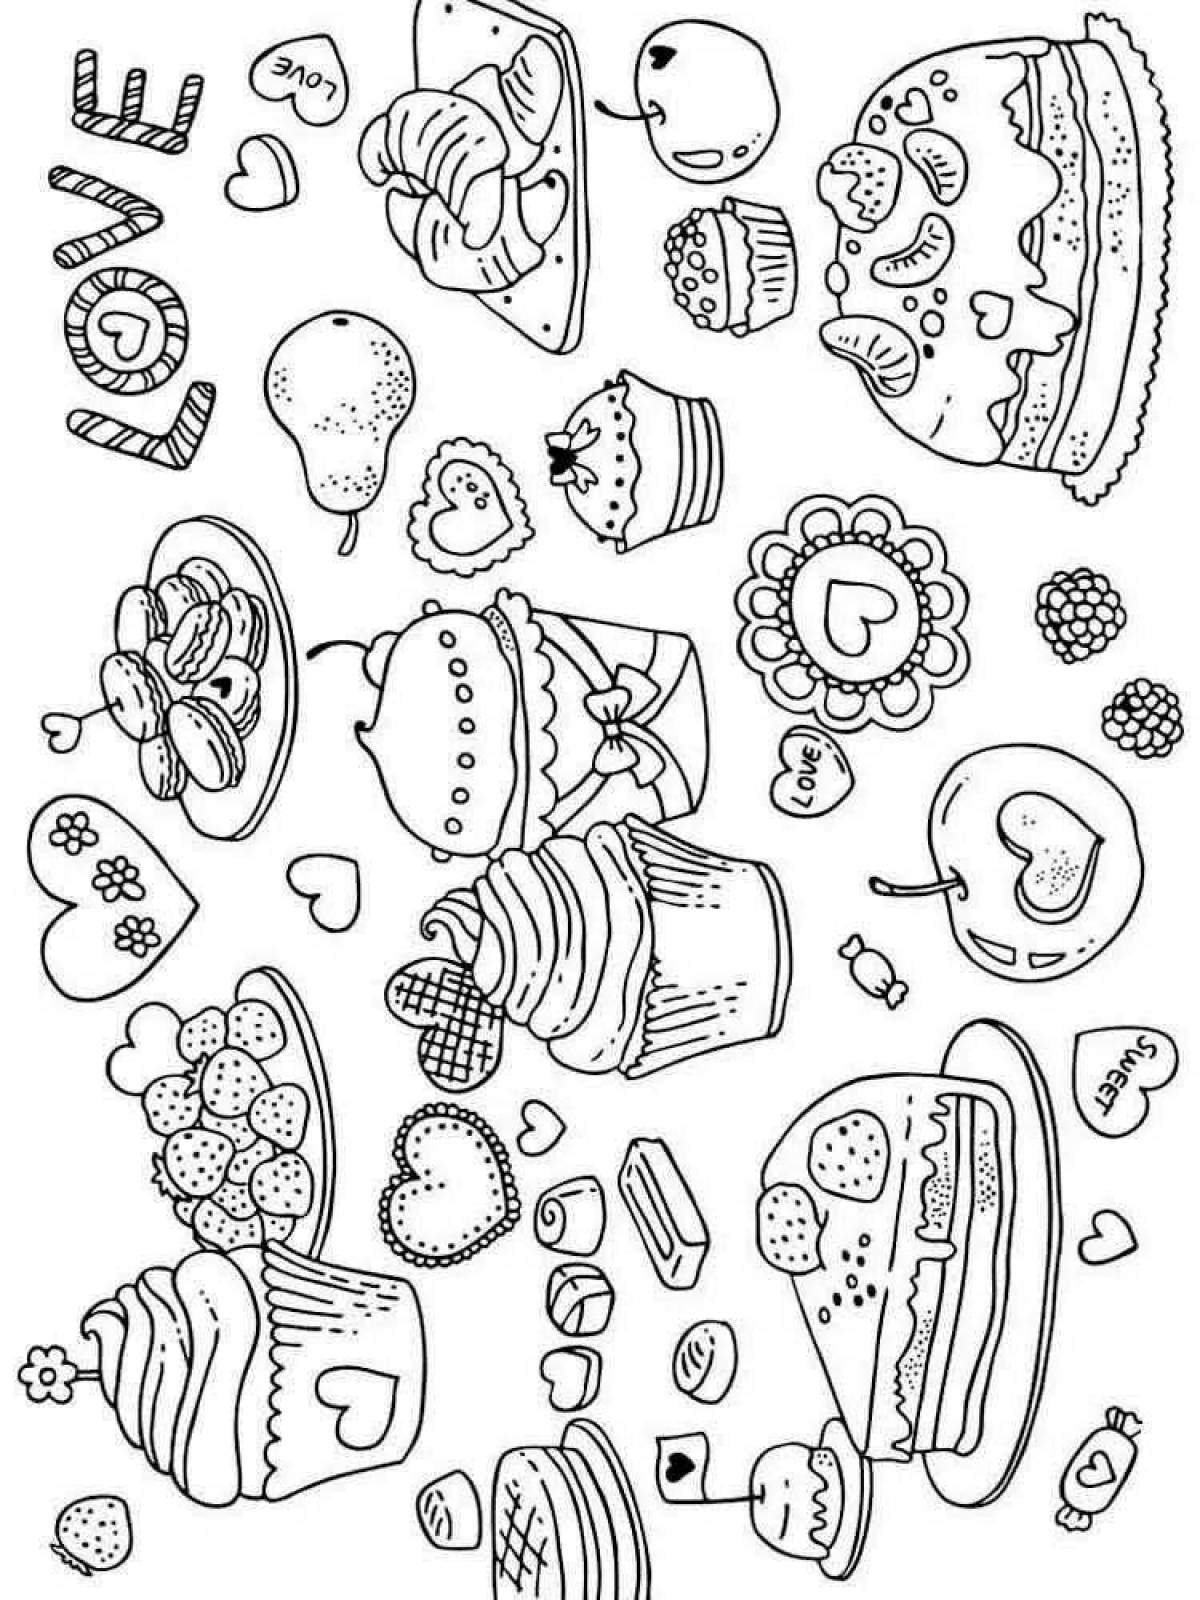 A lot of playful little coloring pages